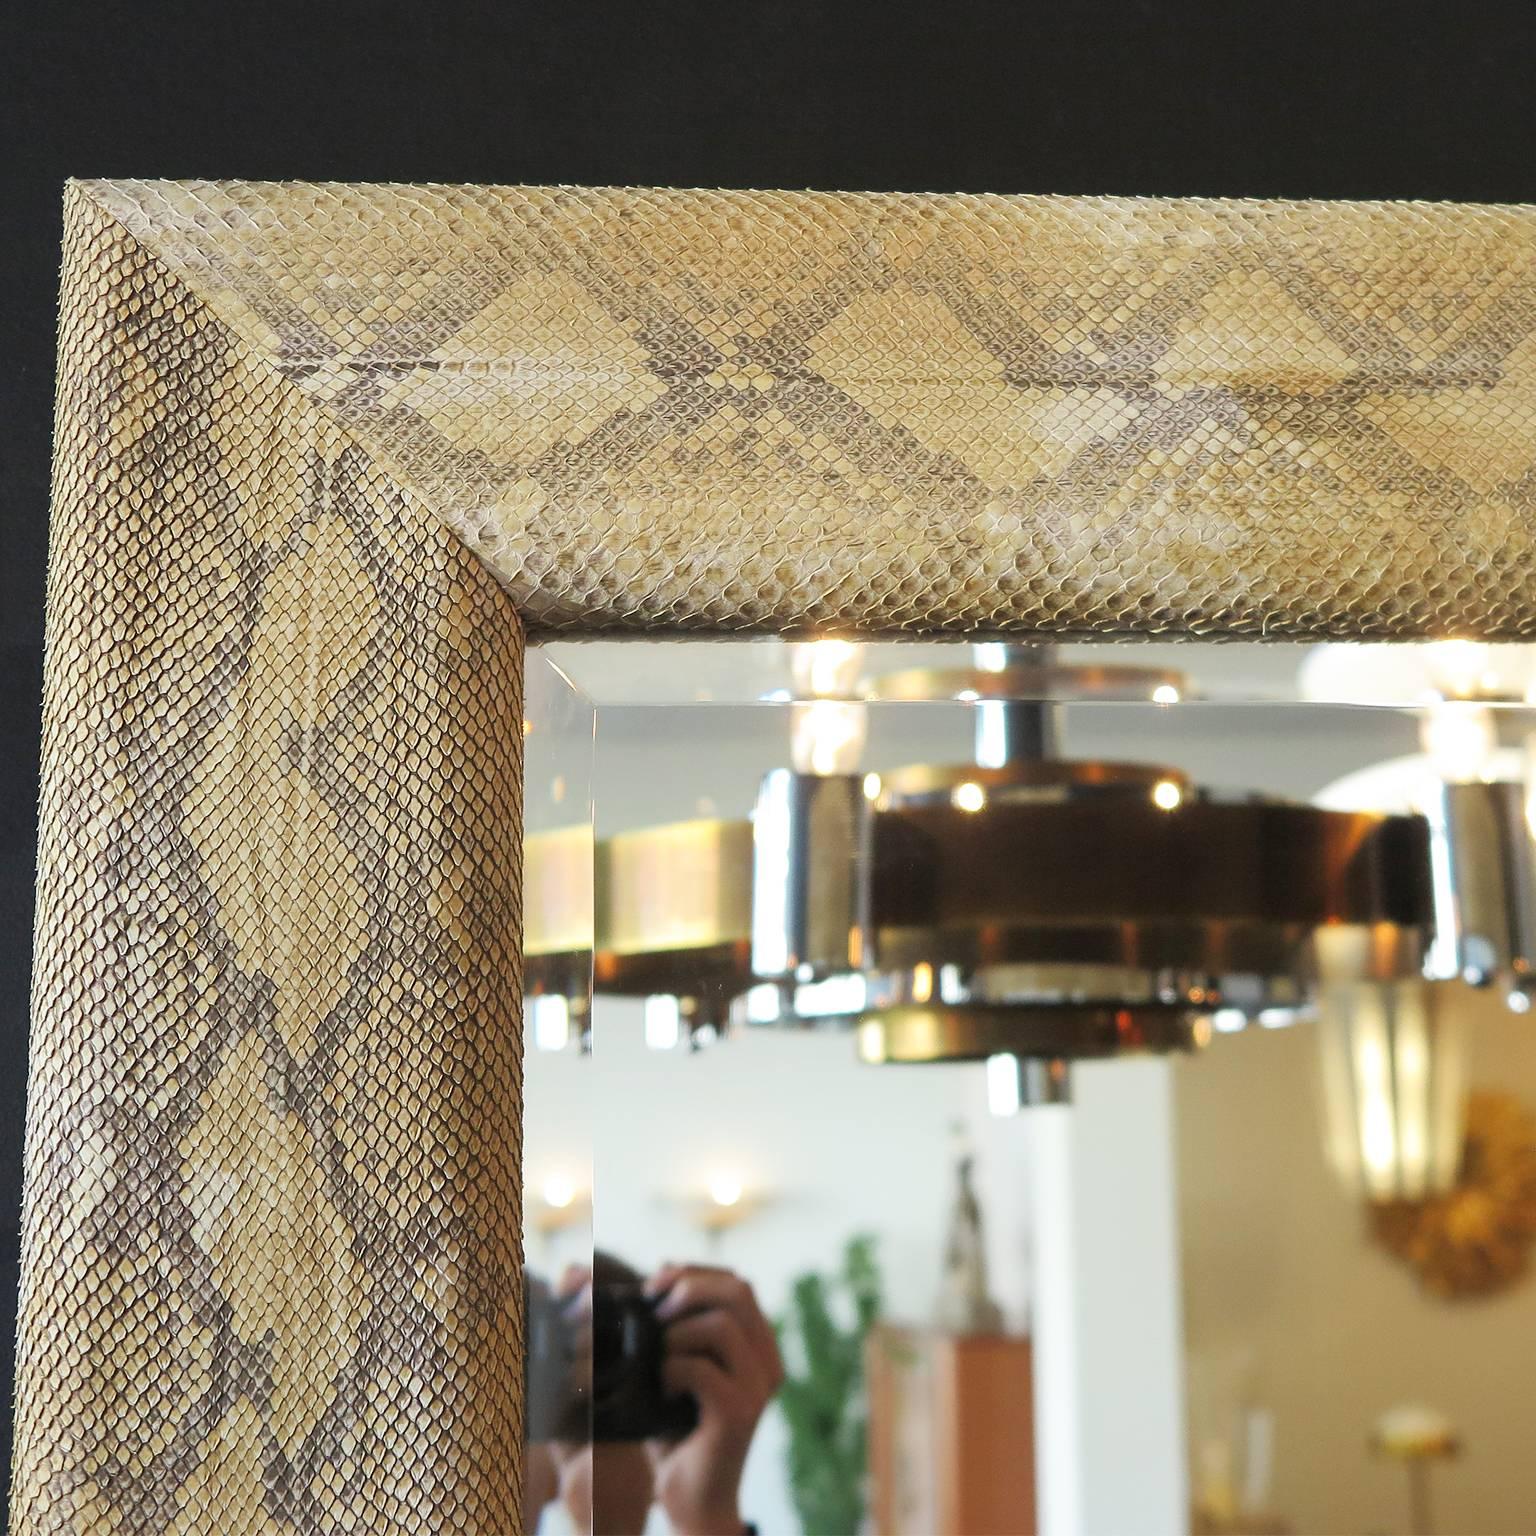 Square wooden mirror in anaconda skin with beveled mirror glass.